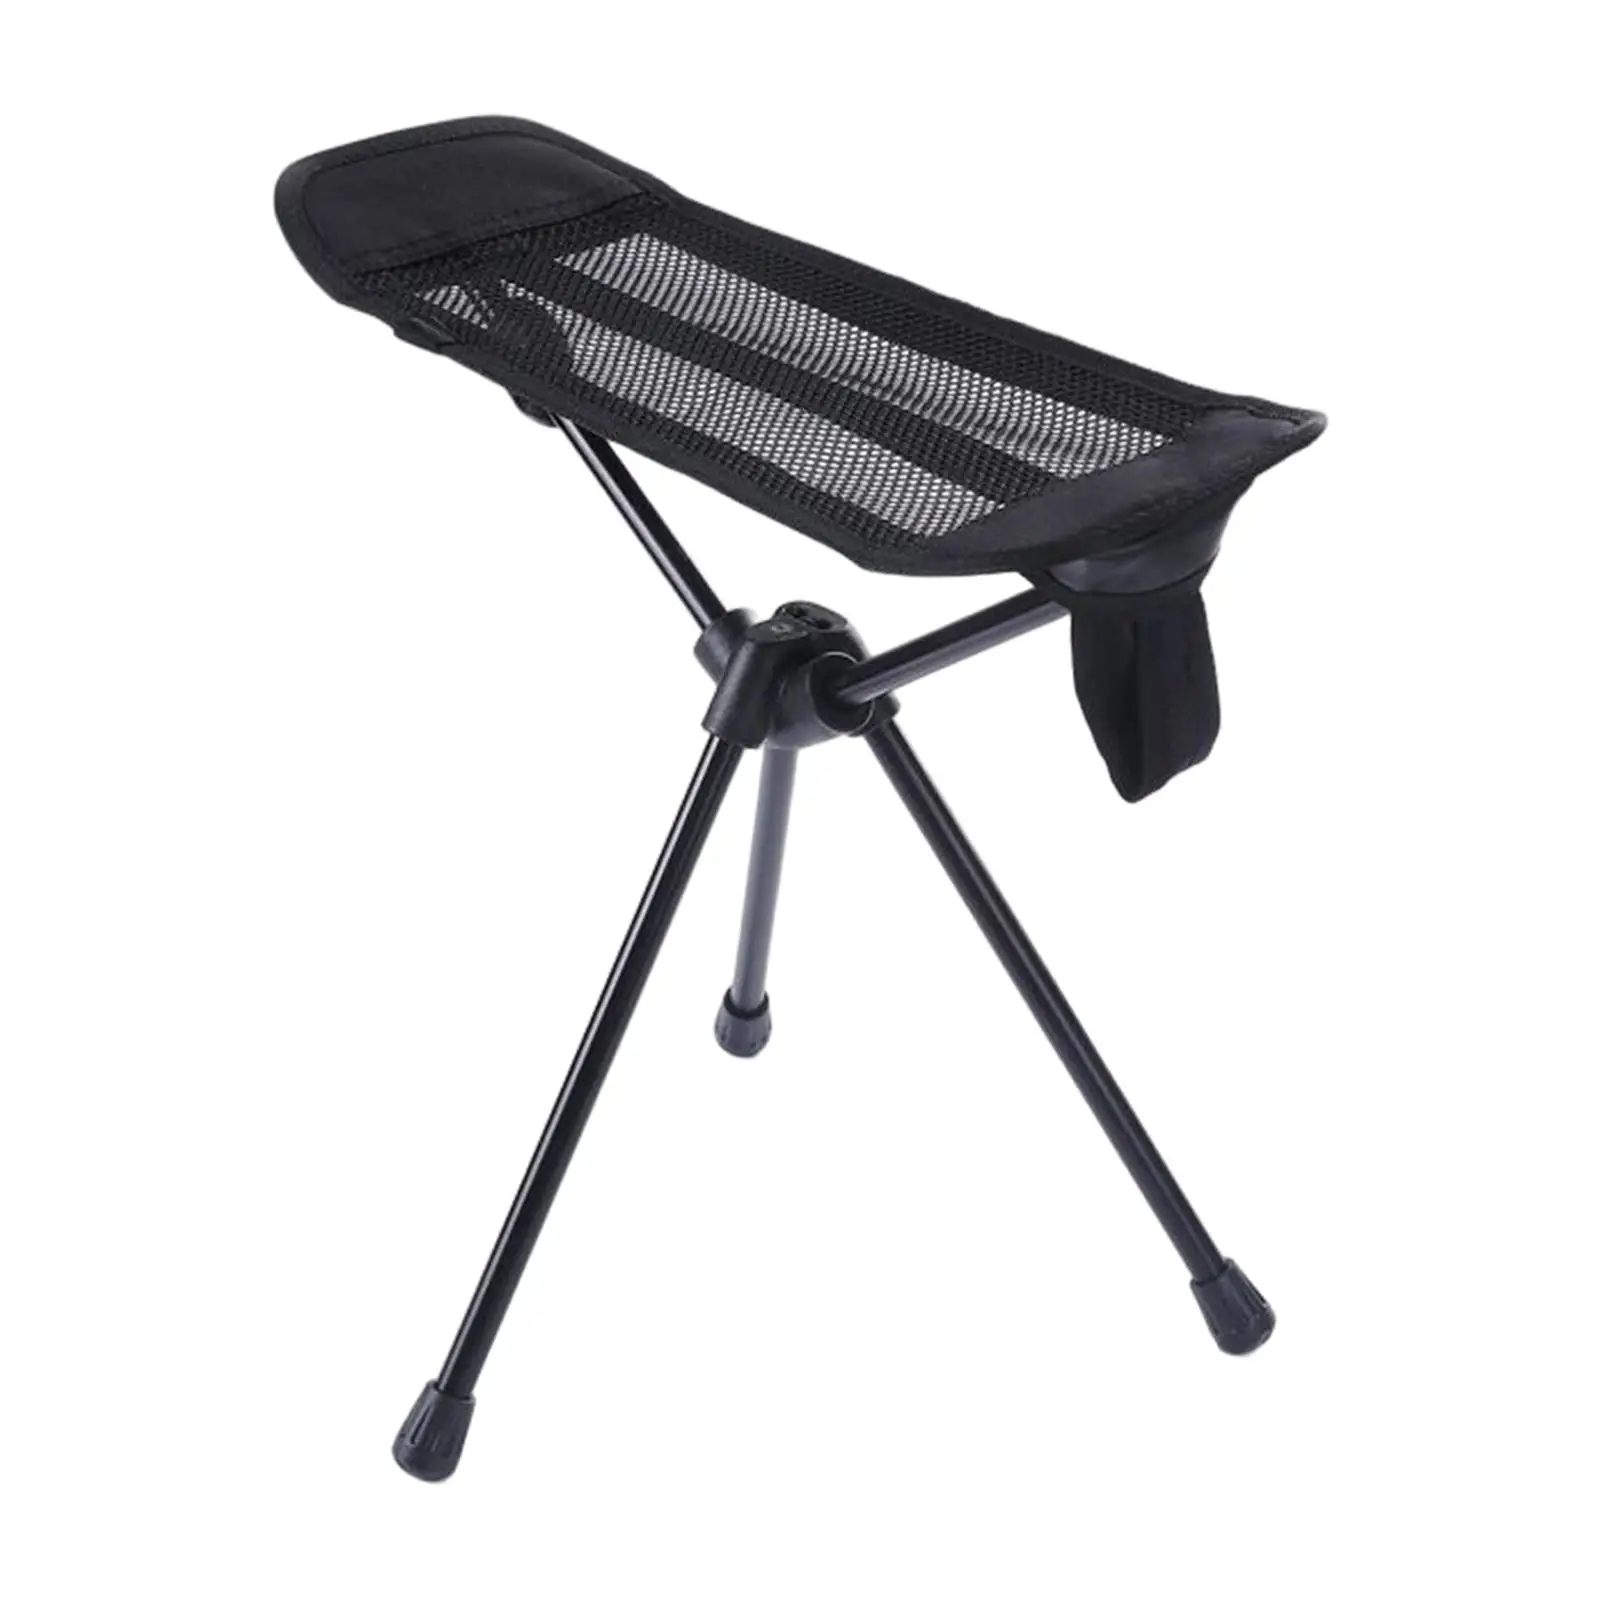 Camping Folding Chair Footrest, Portable Retractable Foot Stool, Outdoor Fishing